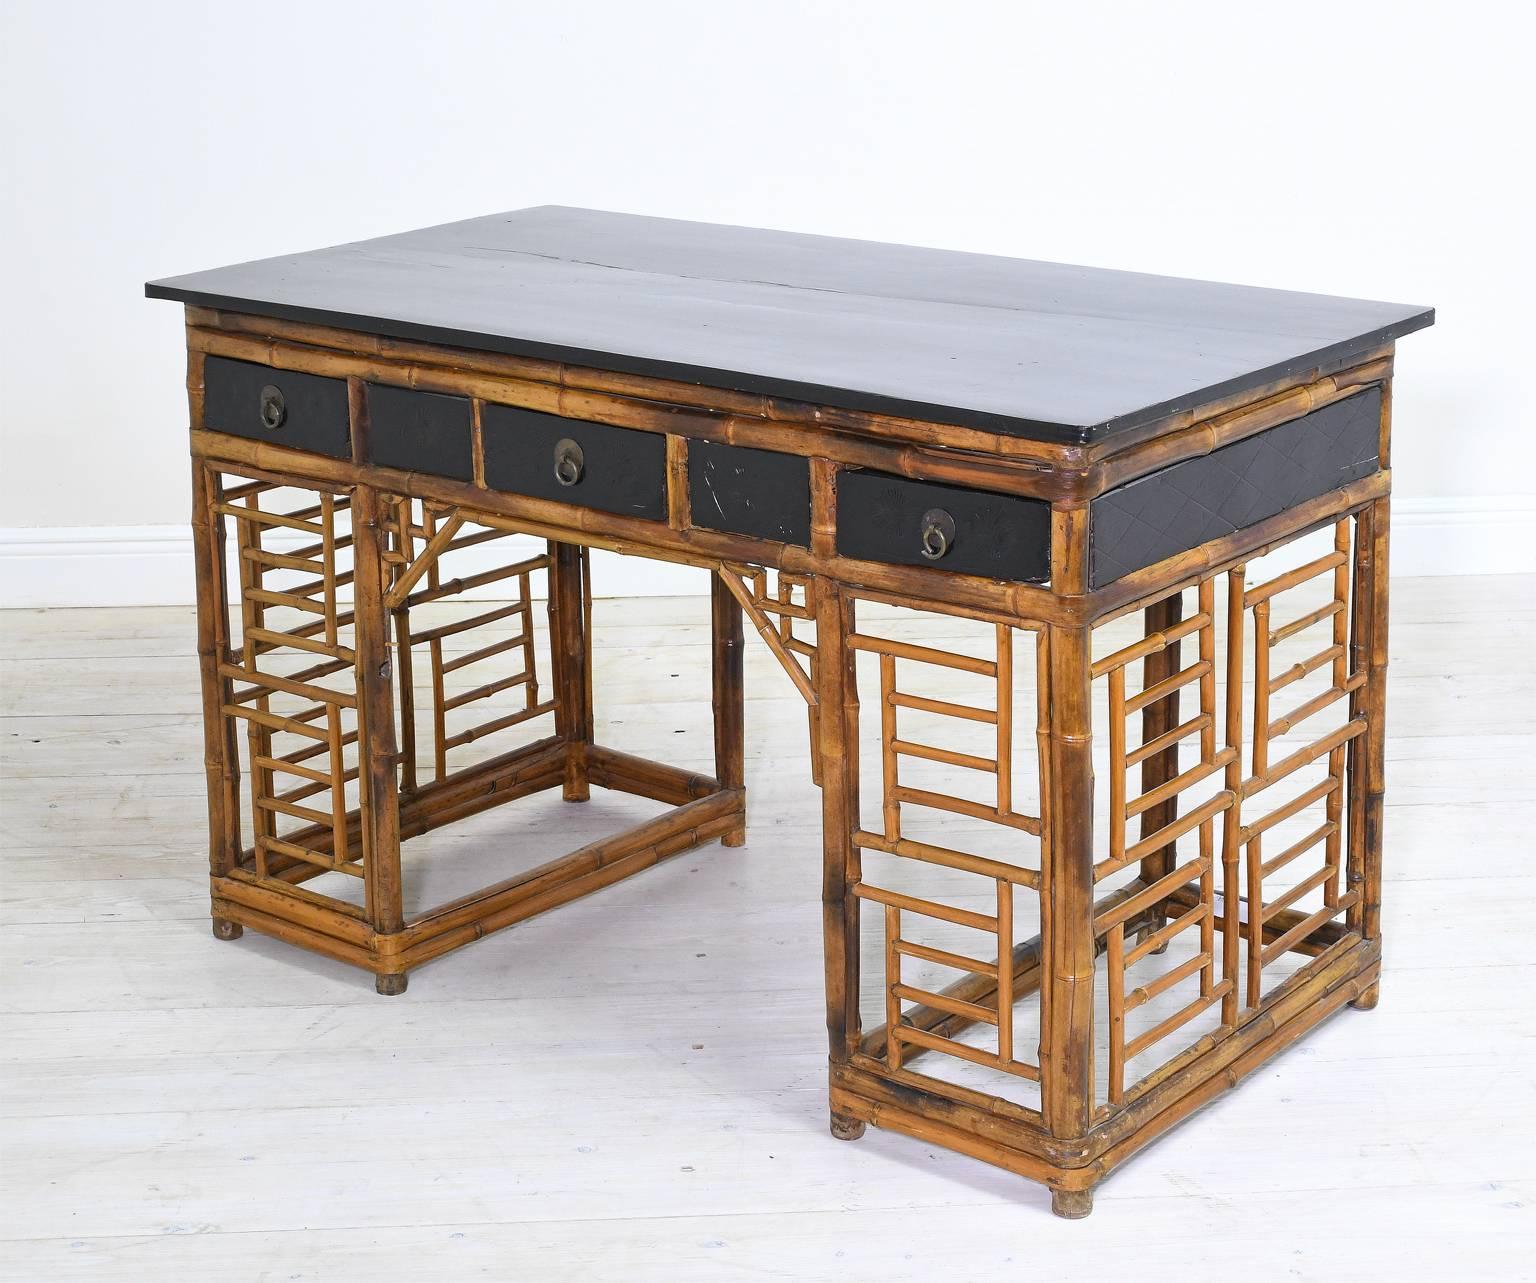 A charming writing desk in bamboo with open lattice work on pedestals, ebonized top and apron, and offering three storage drawers embellished with floral work over ebonized finish, China, circa 1930.

Desk may float since it has finished